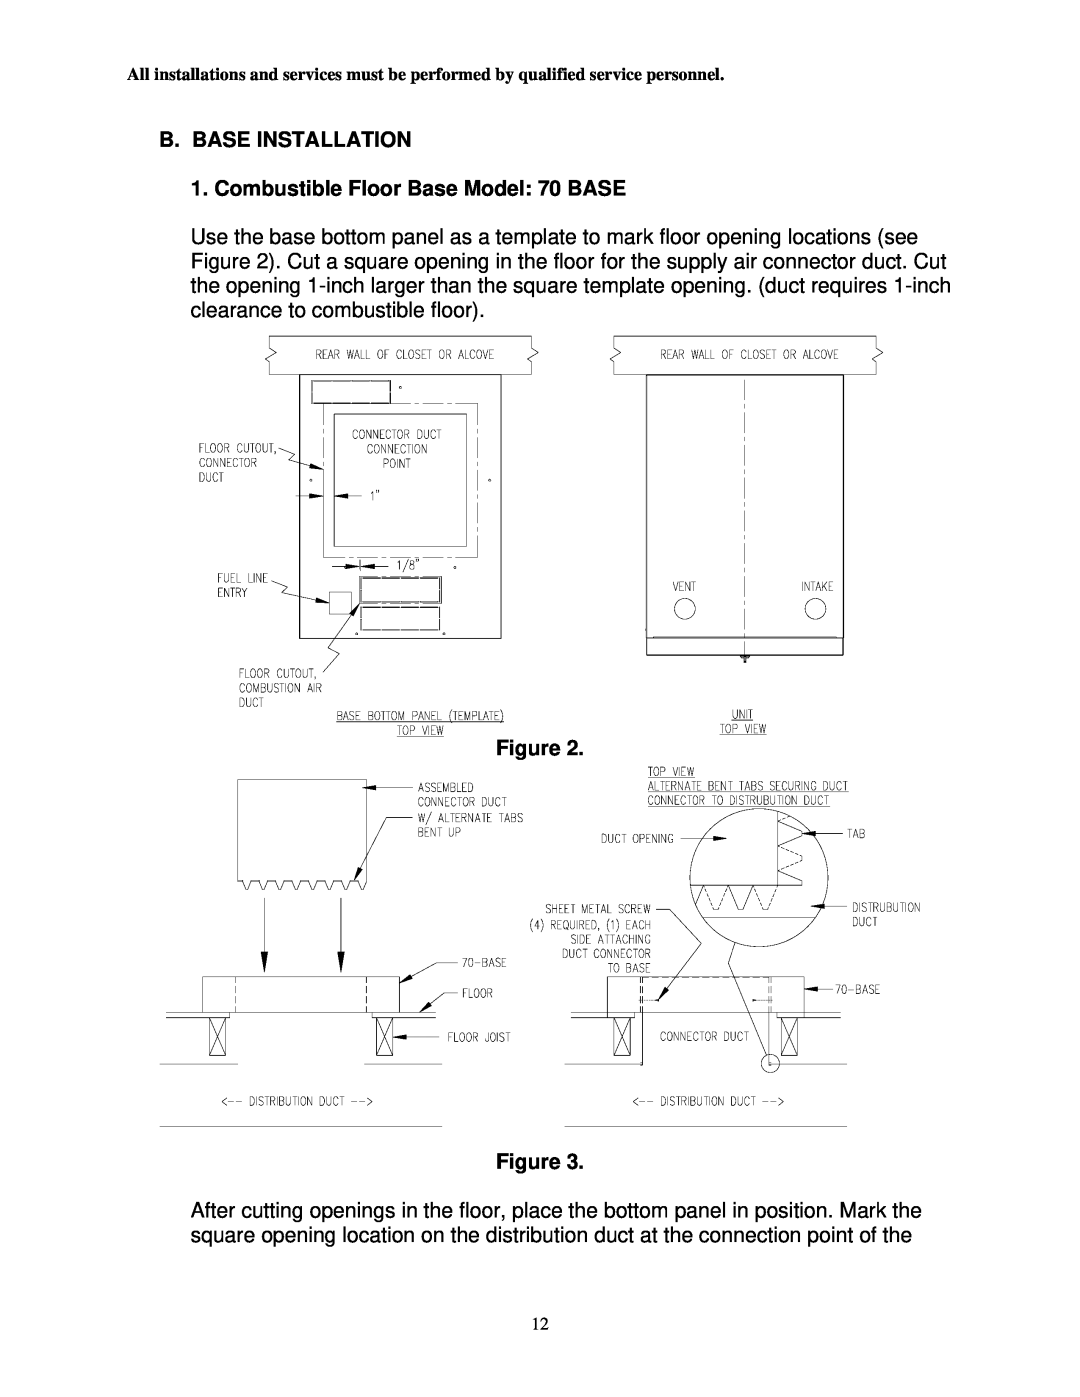 Thermo Products CMA2-75N, CMA1-50N service manual B. Base Installation, Combustible Floor Base Model: 70 BASE, Figure Figure 